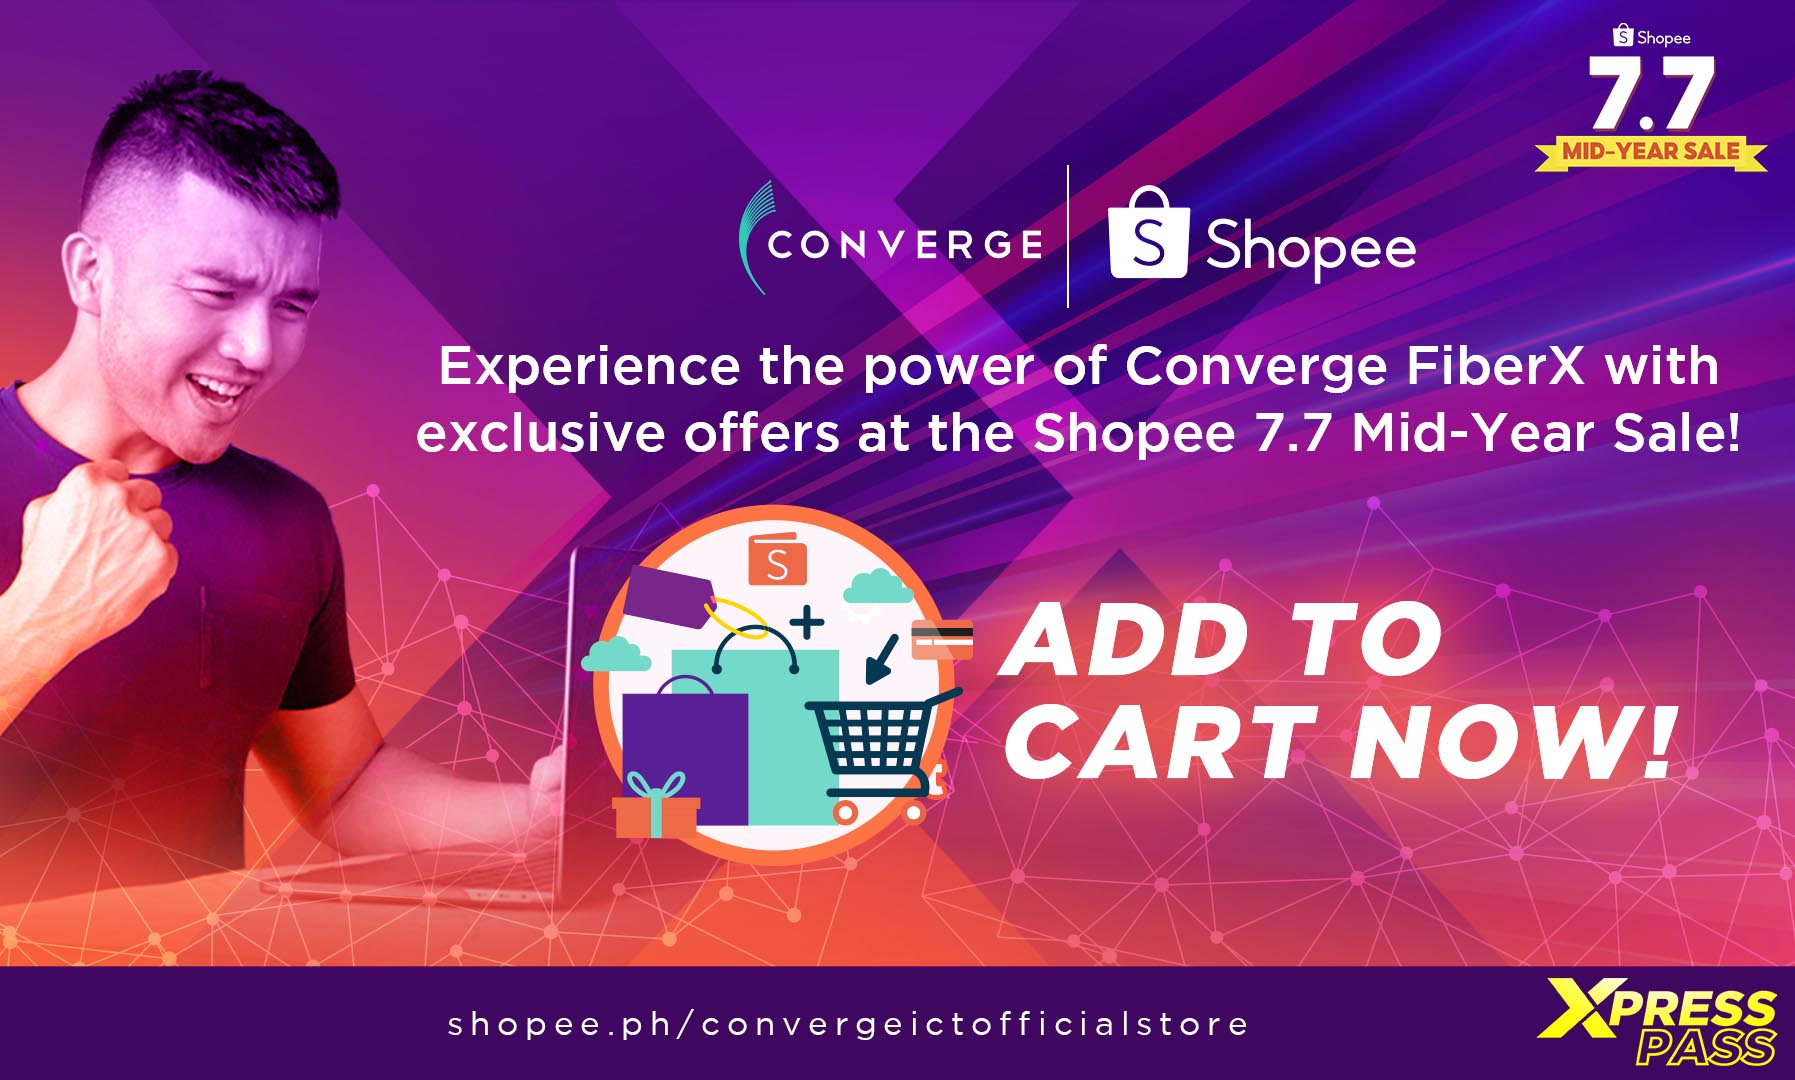 Experience the power of Converge FiberX with exclusive offers at the Shopee 7.7 Mid-Year Sale